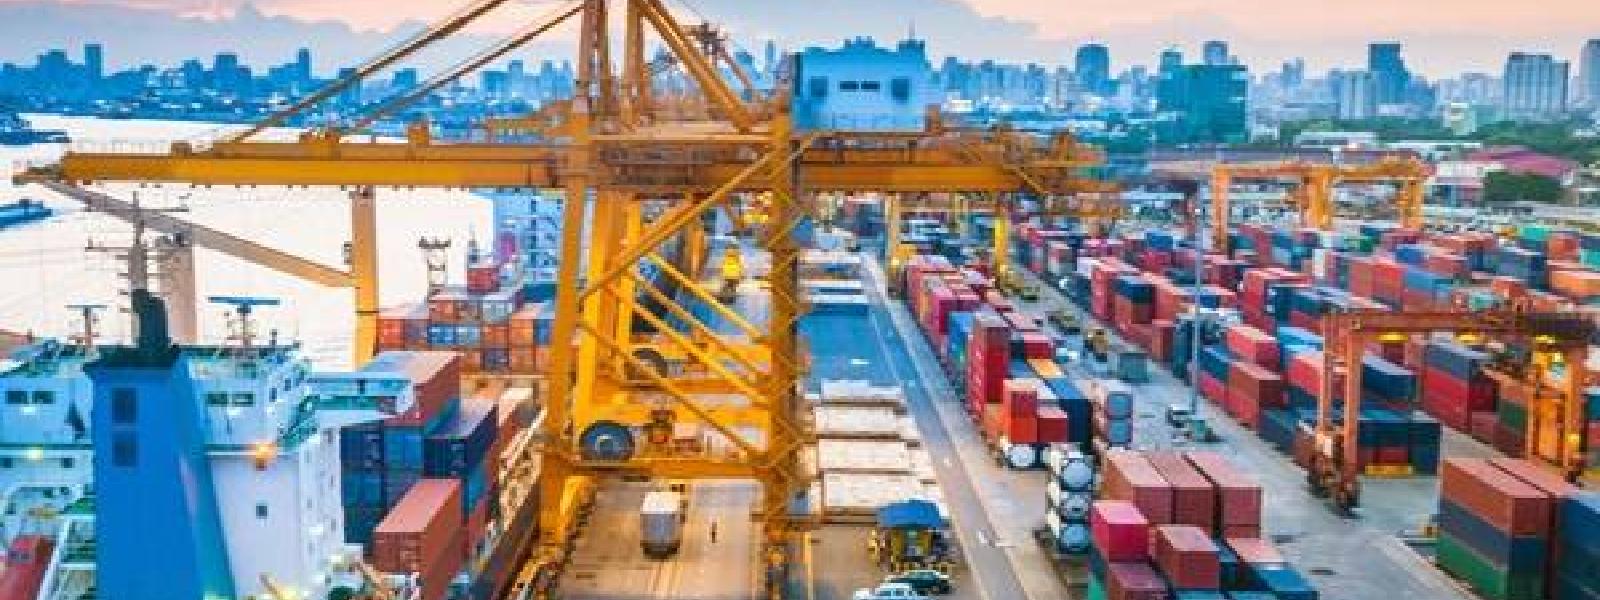 US $ 50 Mn allocated to release essential goods from ports